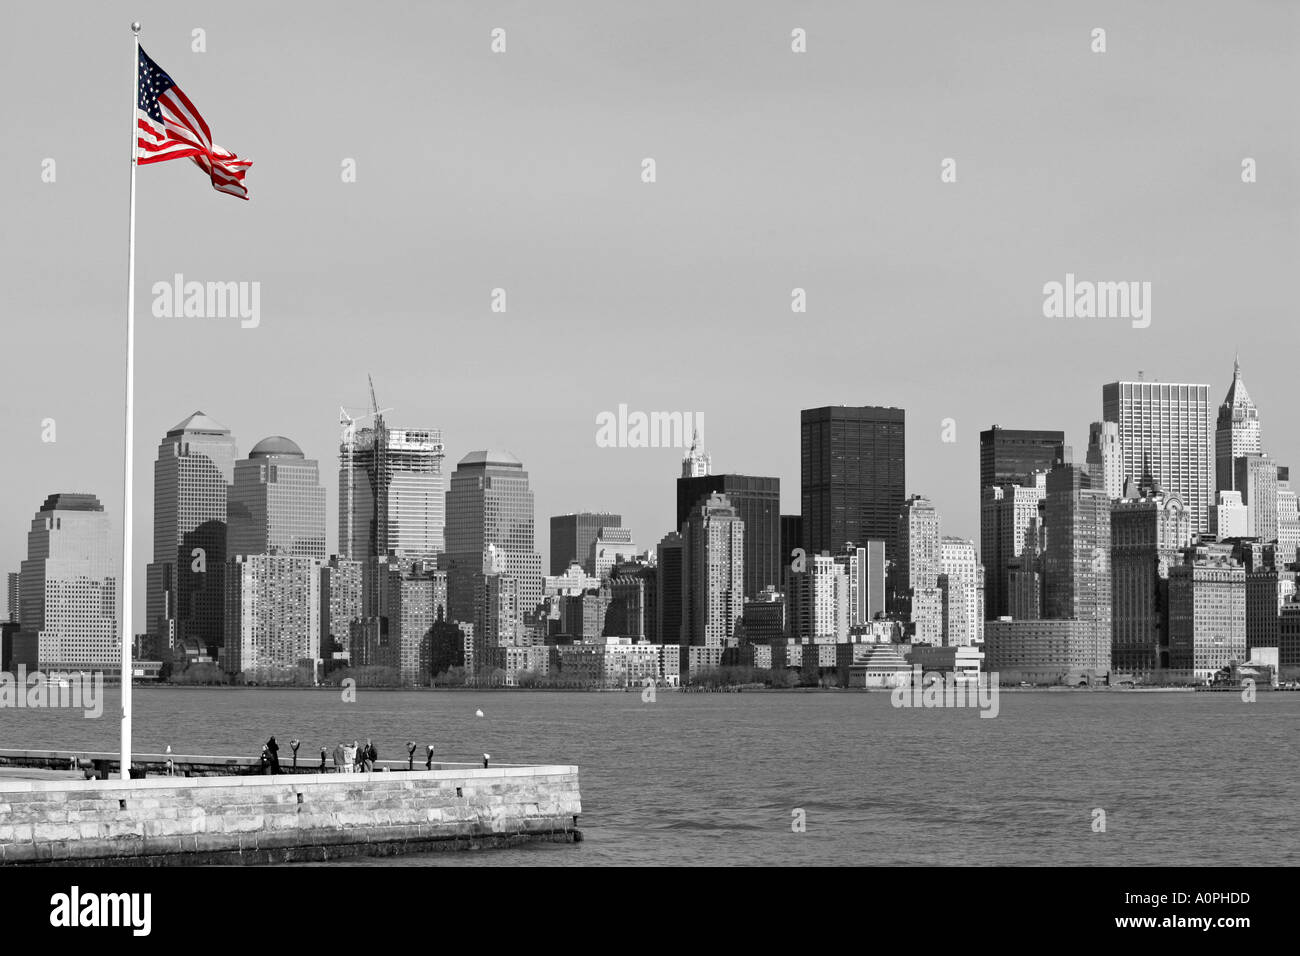 Black and white image of Manhattan island New York City from Liberty island with selectively colored USA American national flag Stock Photo